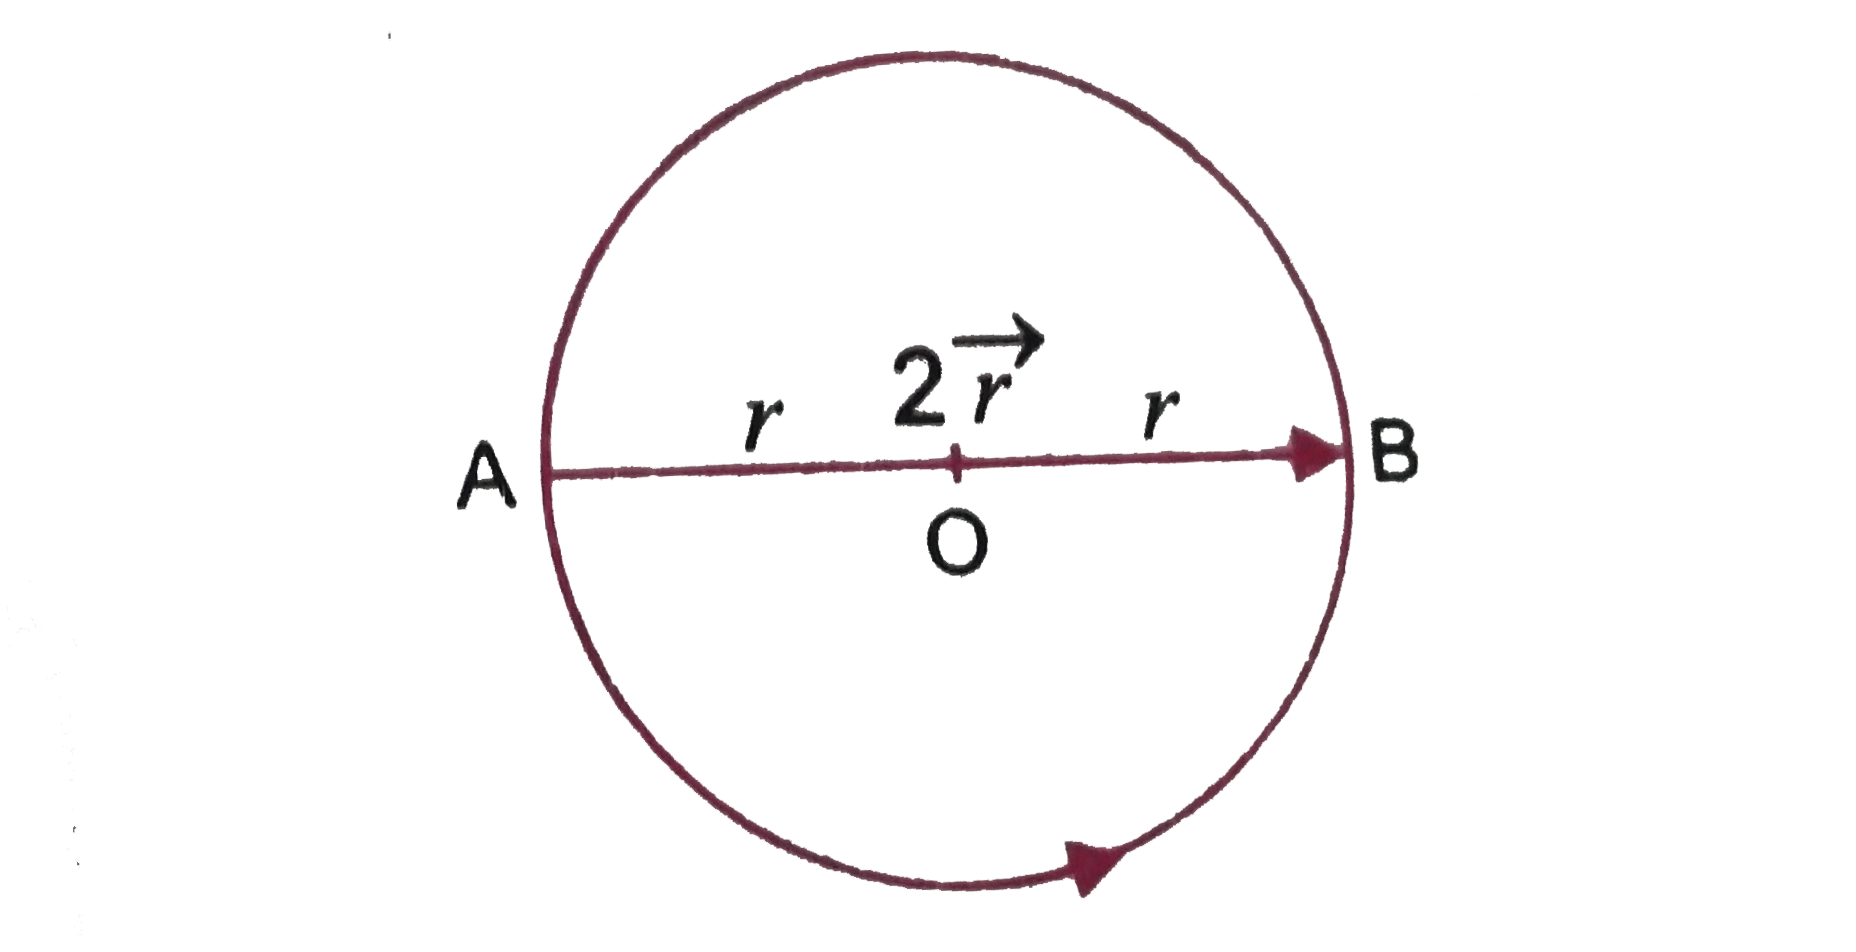 AB is diameter of circle of radius r. A particle starting  from A completes two and half revolution. Calculate the distance travelled by the particle and its displacement